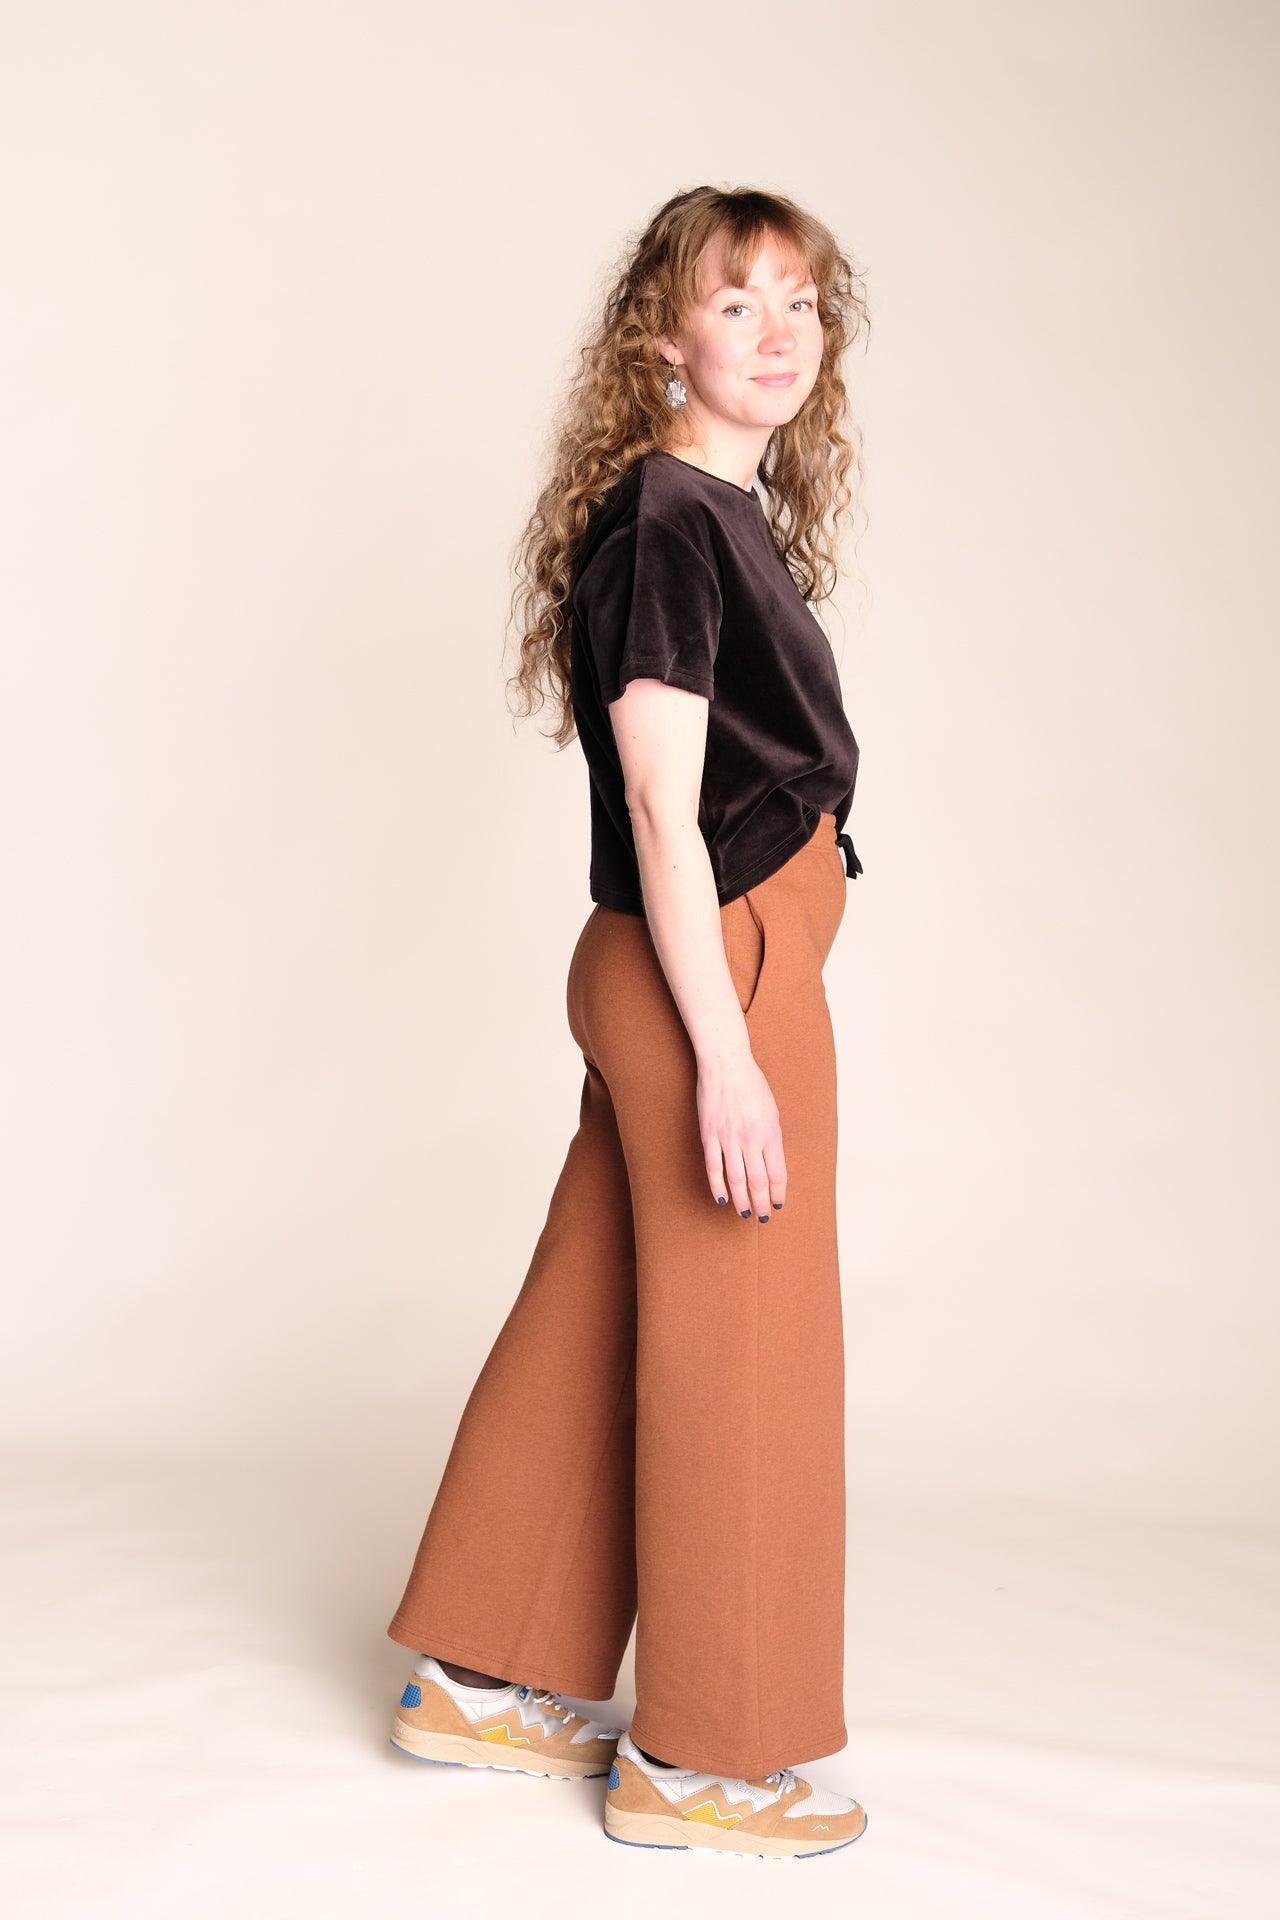 Buy online our sustainable clothing Trousers Luna Trousers - Copper - MORICO